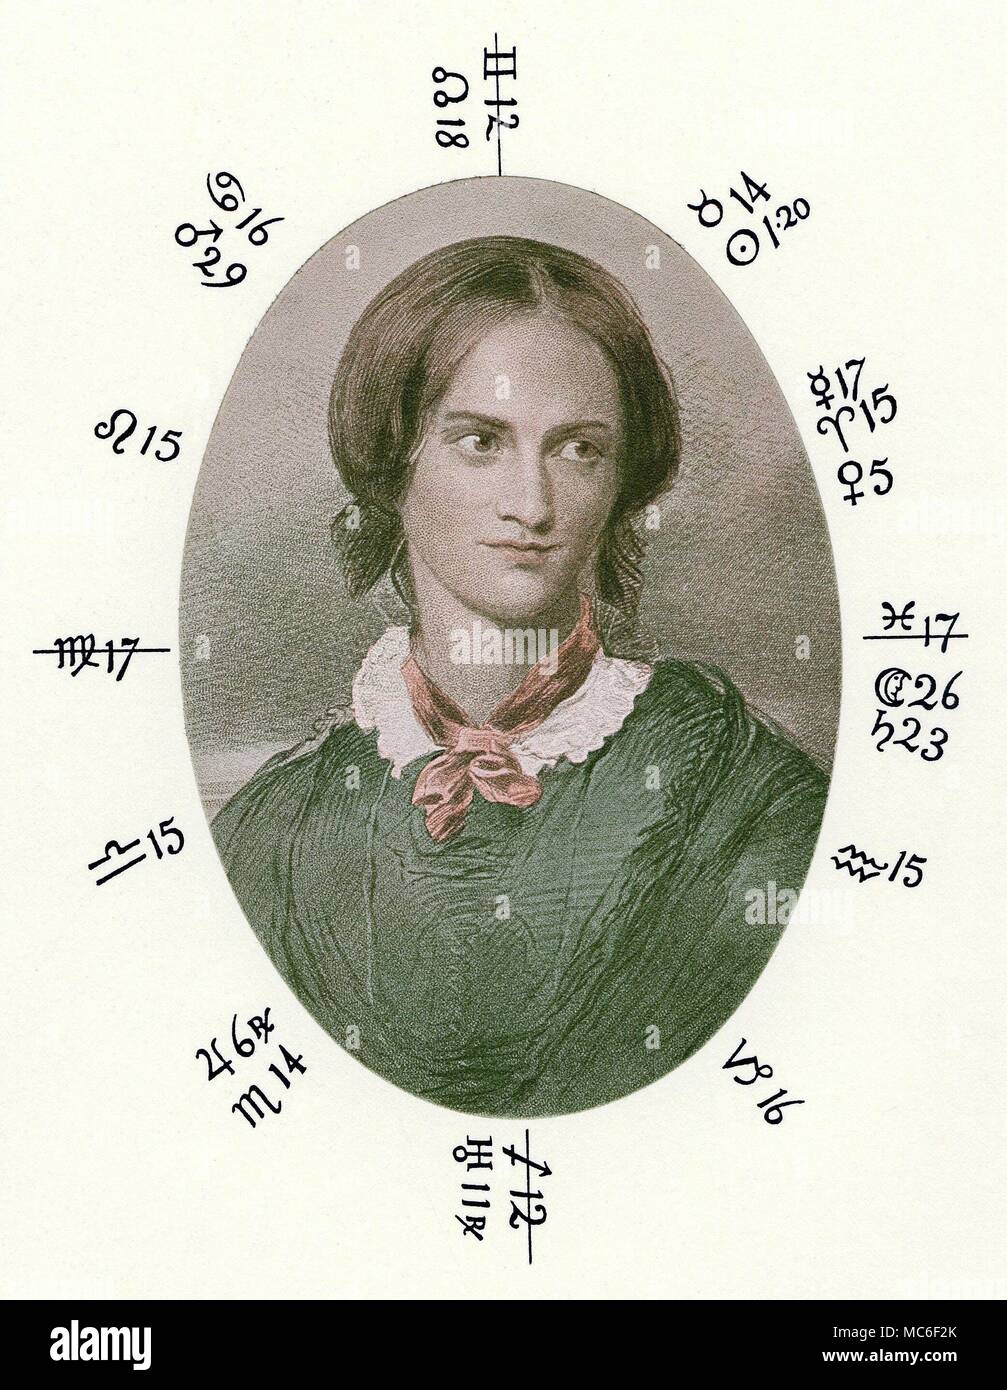 HOROSCOPES - CHARLOTTE BRONTE Horoscope of Charlotte Bronte, who was born on 21 April 1816 at Thornton, Yorkshire. This chart is based on that given by David Ovason. The Hidden Influences of Eclipses, 1999, pp140-2. The colour picture within the horoscope is a process print of 1905, based on the drawing made by George Richmond, when Charlotte was in London, during 1850 Stock Photo